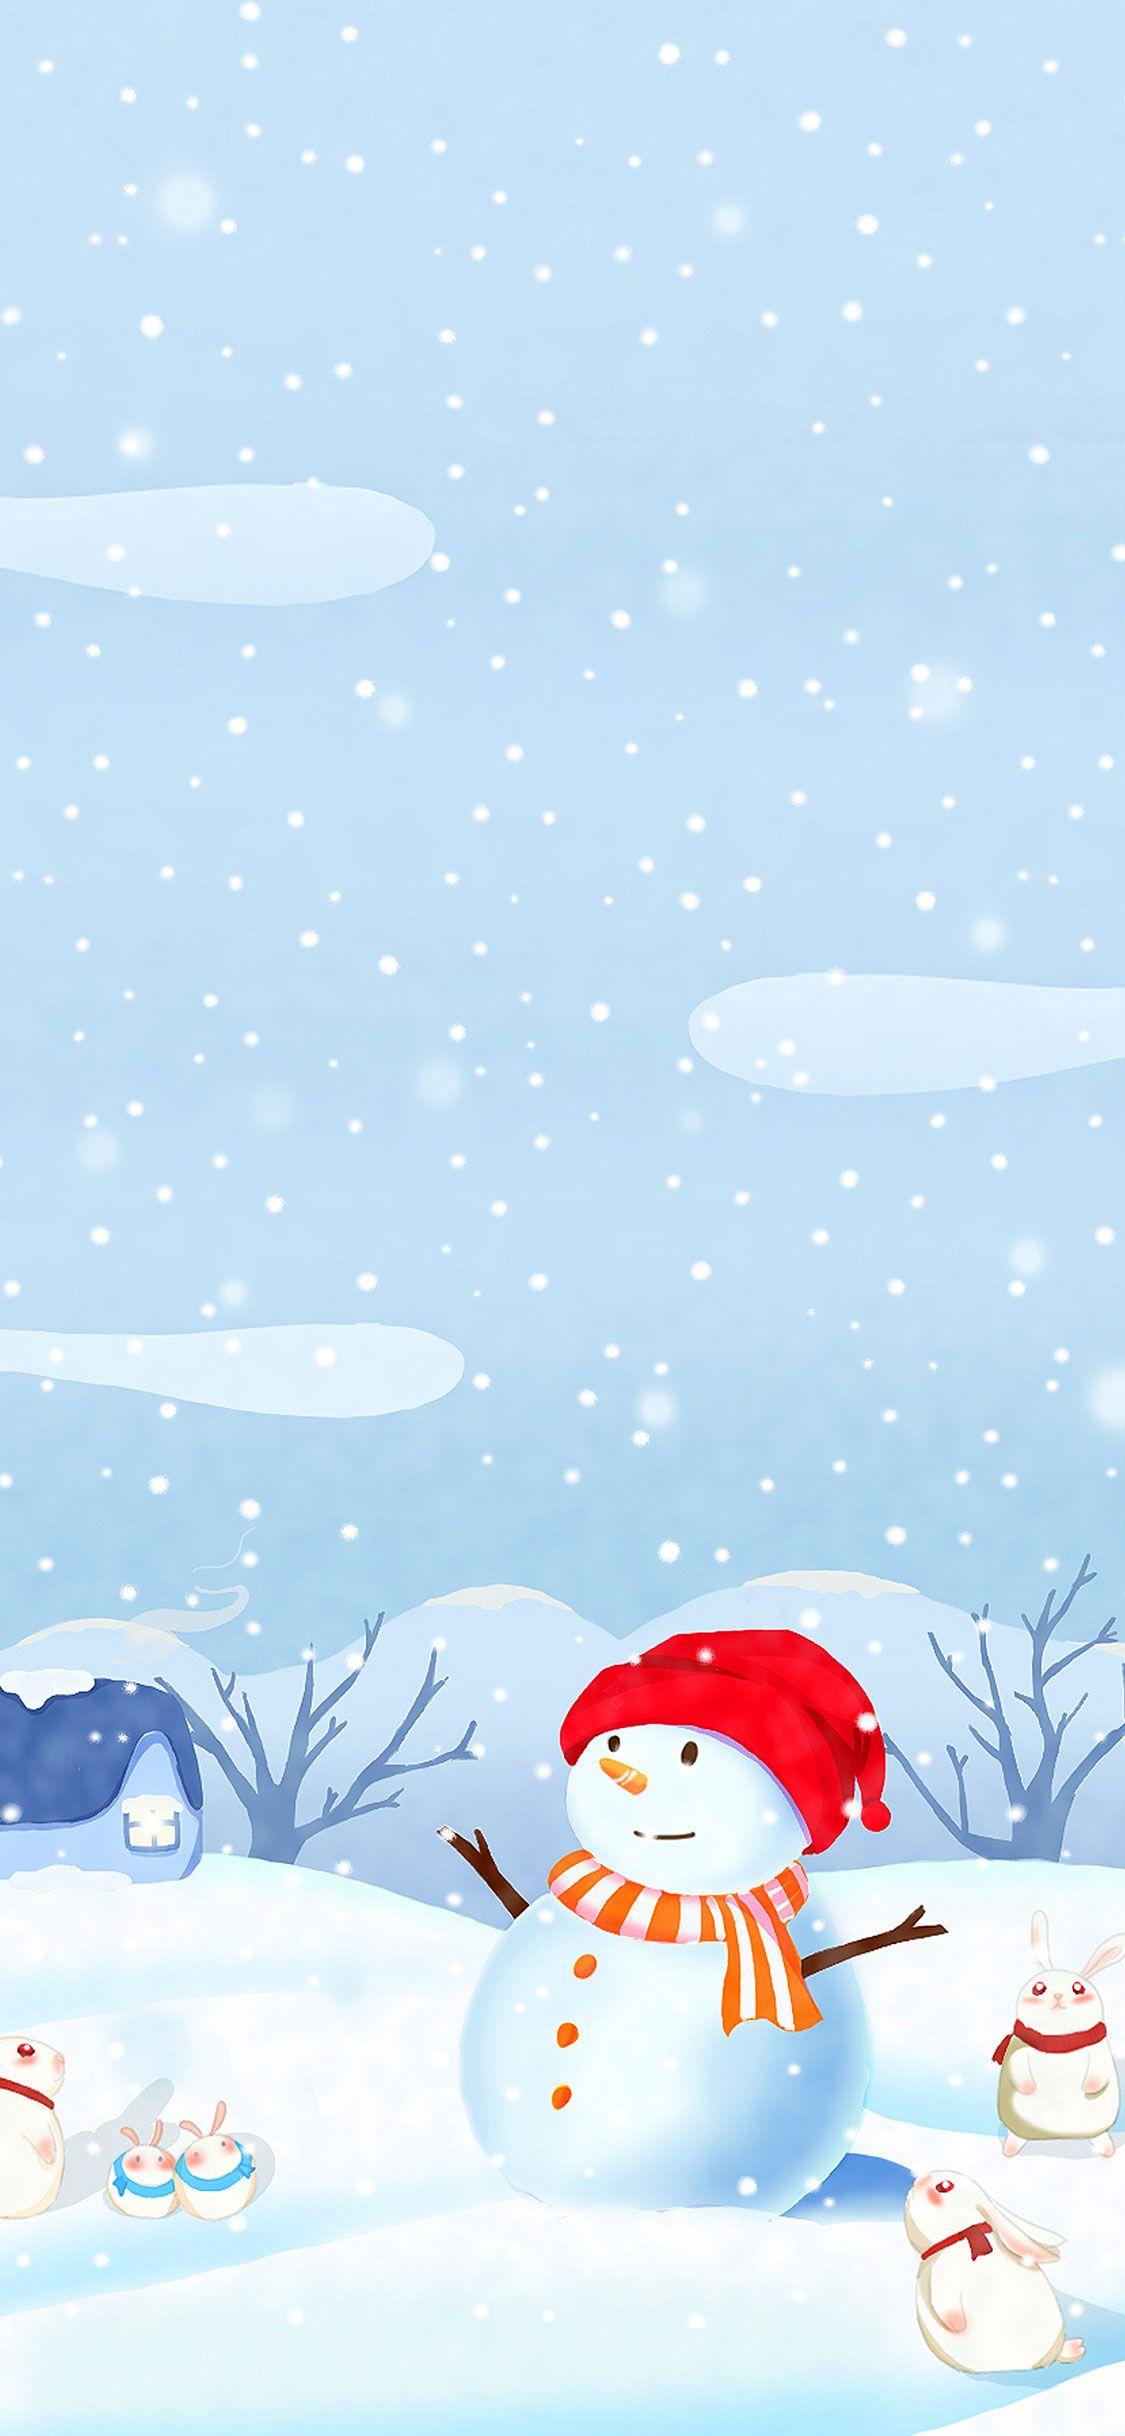 Free Snowman Wallpapers  Wallpaper Cave